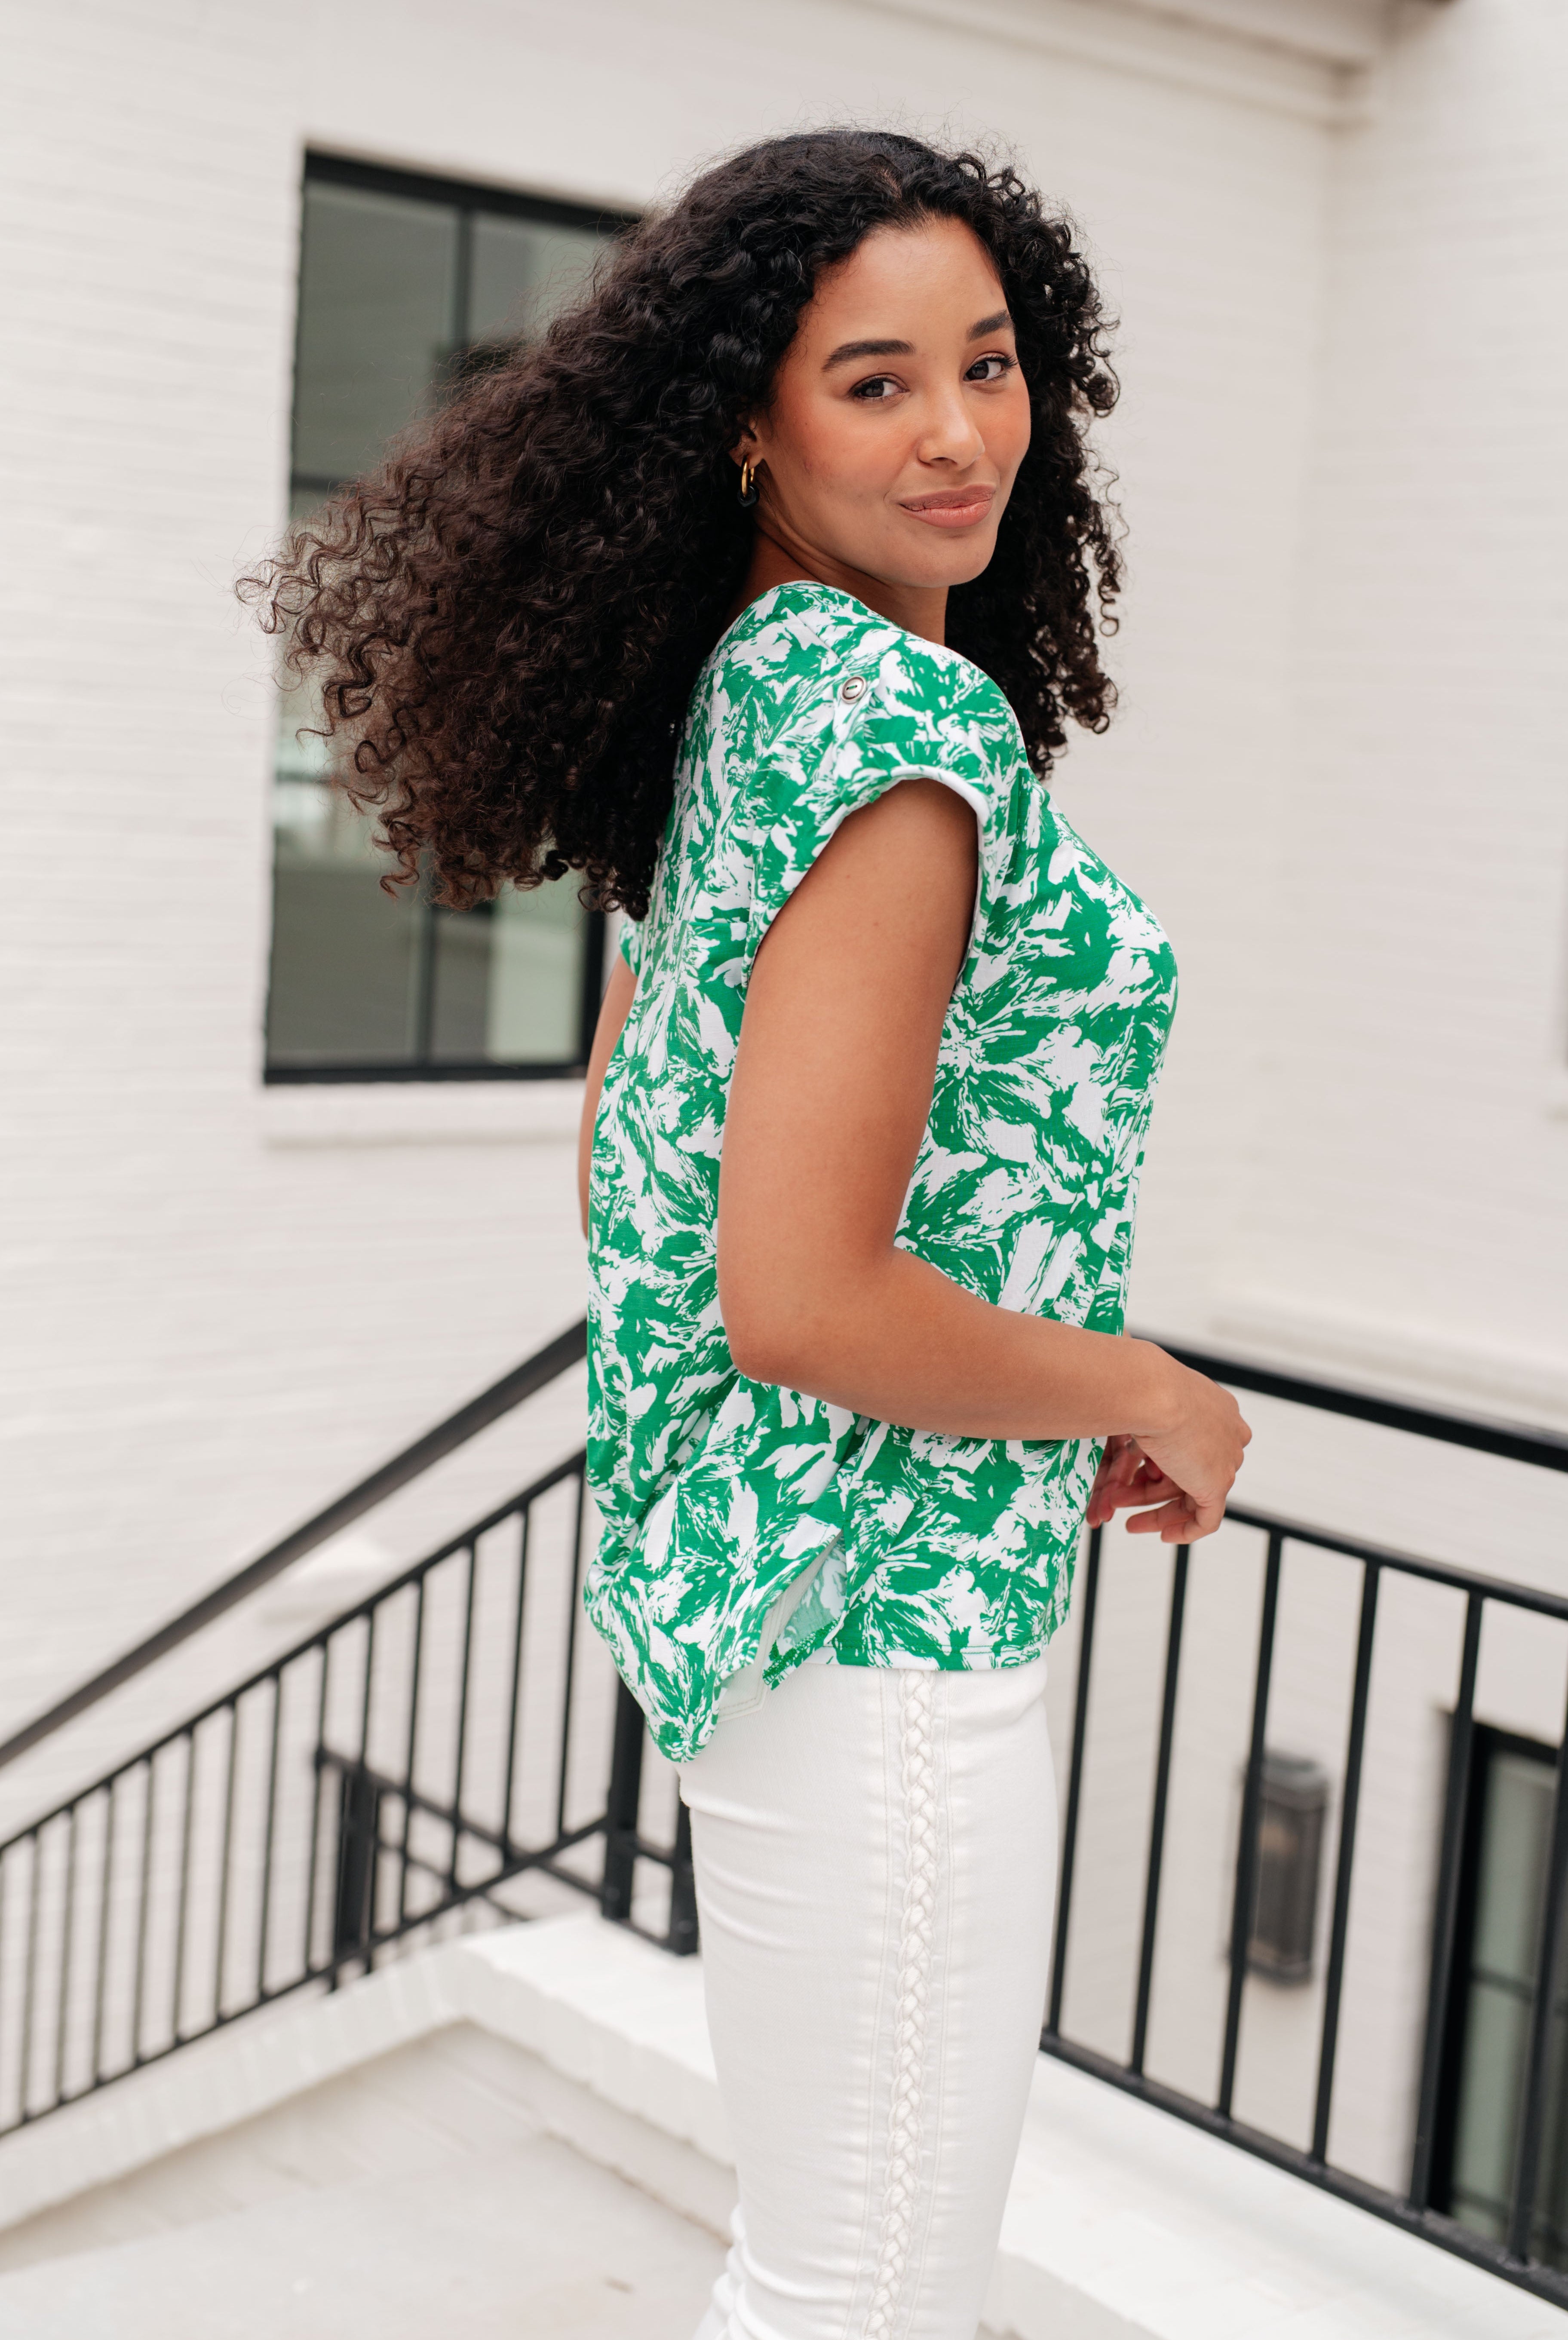 Lizzy Cap Sleeve Top in Emerald and White Floral-Tops-Ave Shops-Urban Threadz Boutique, Women's Fashion Boutique in Saugatuck, MI